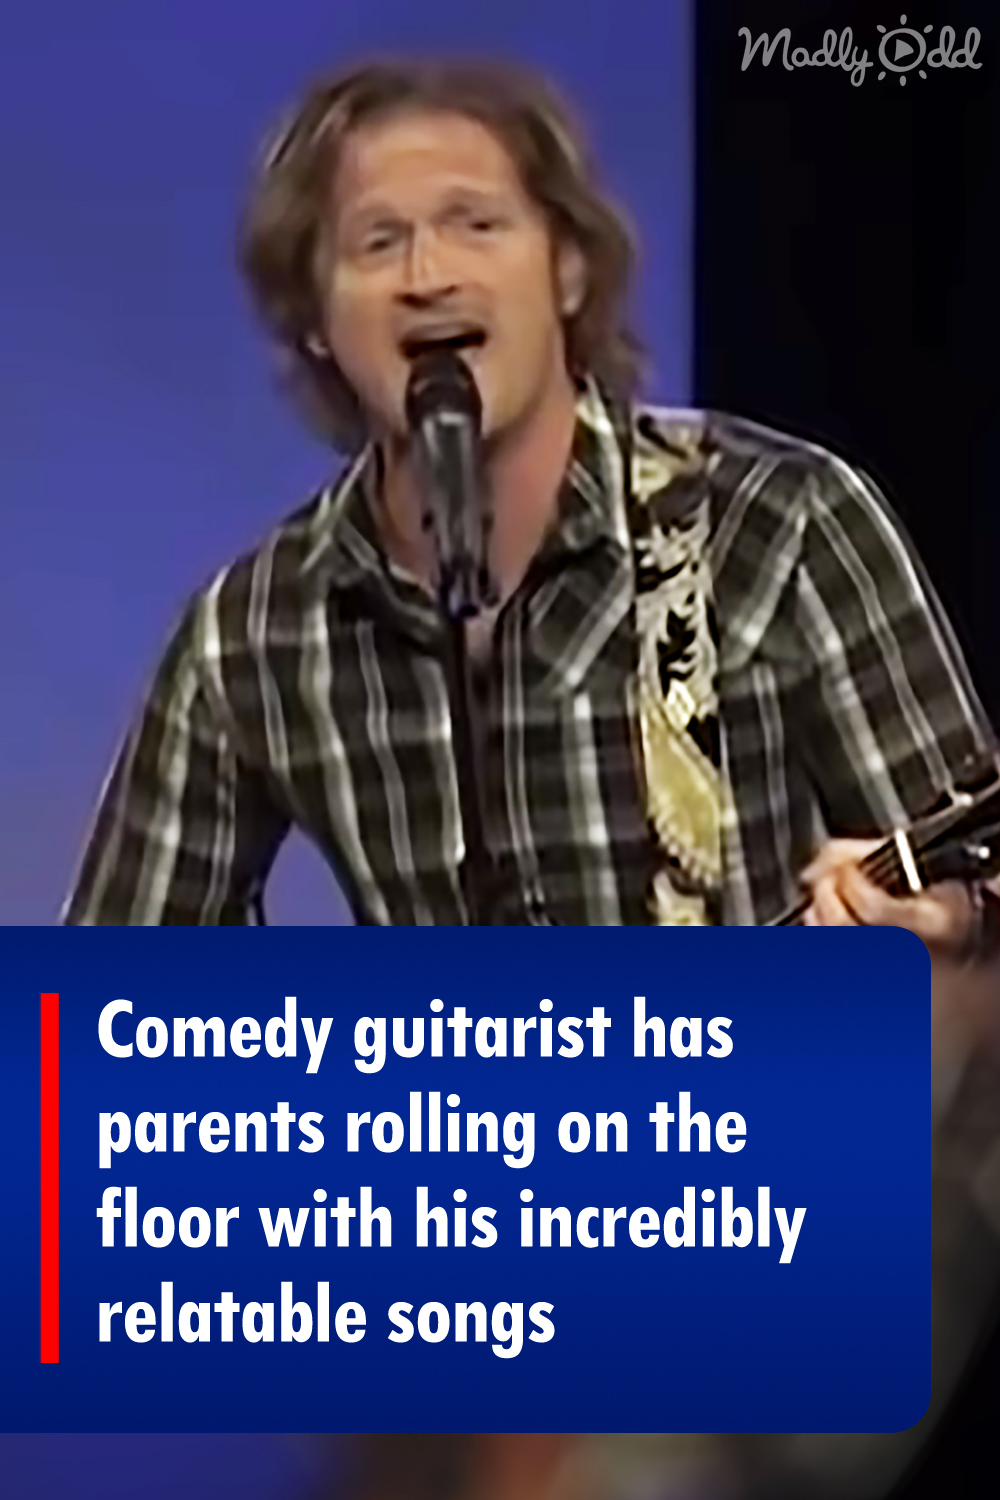 Comedy guitarist has parents rolling on the floor with his incredibly relatable songs